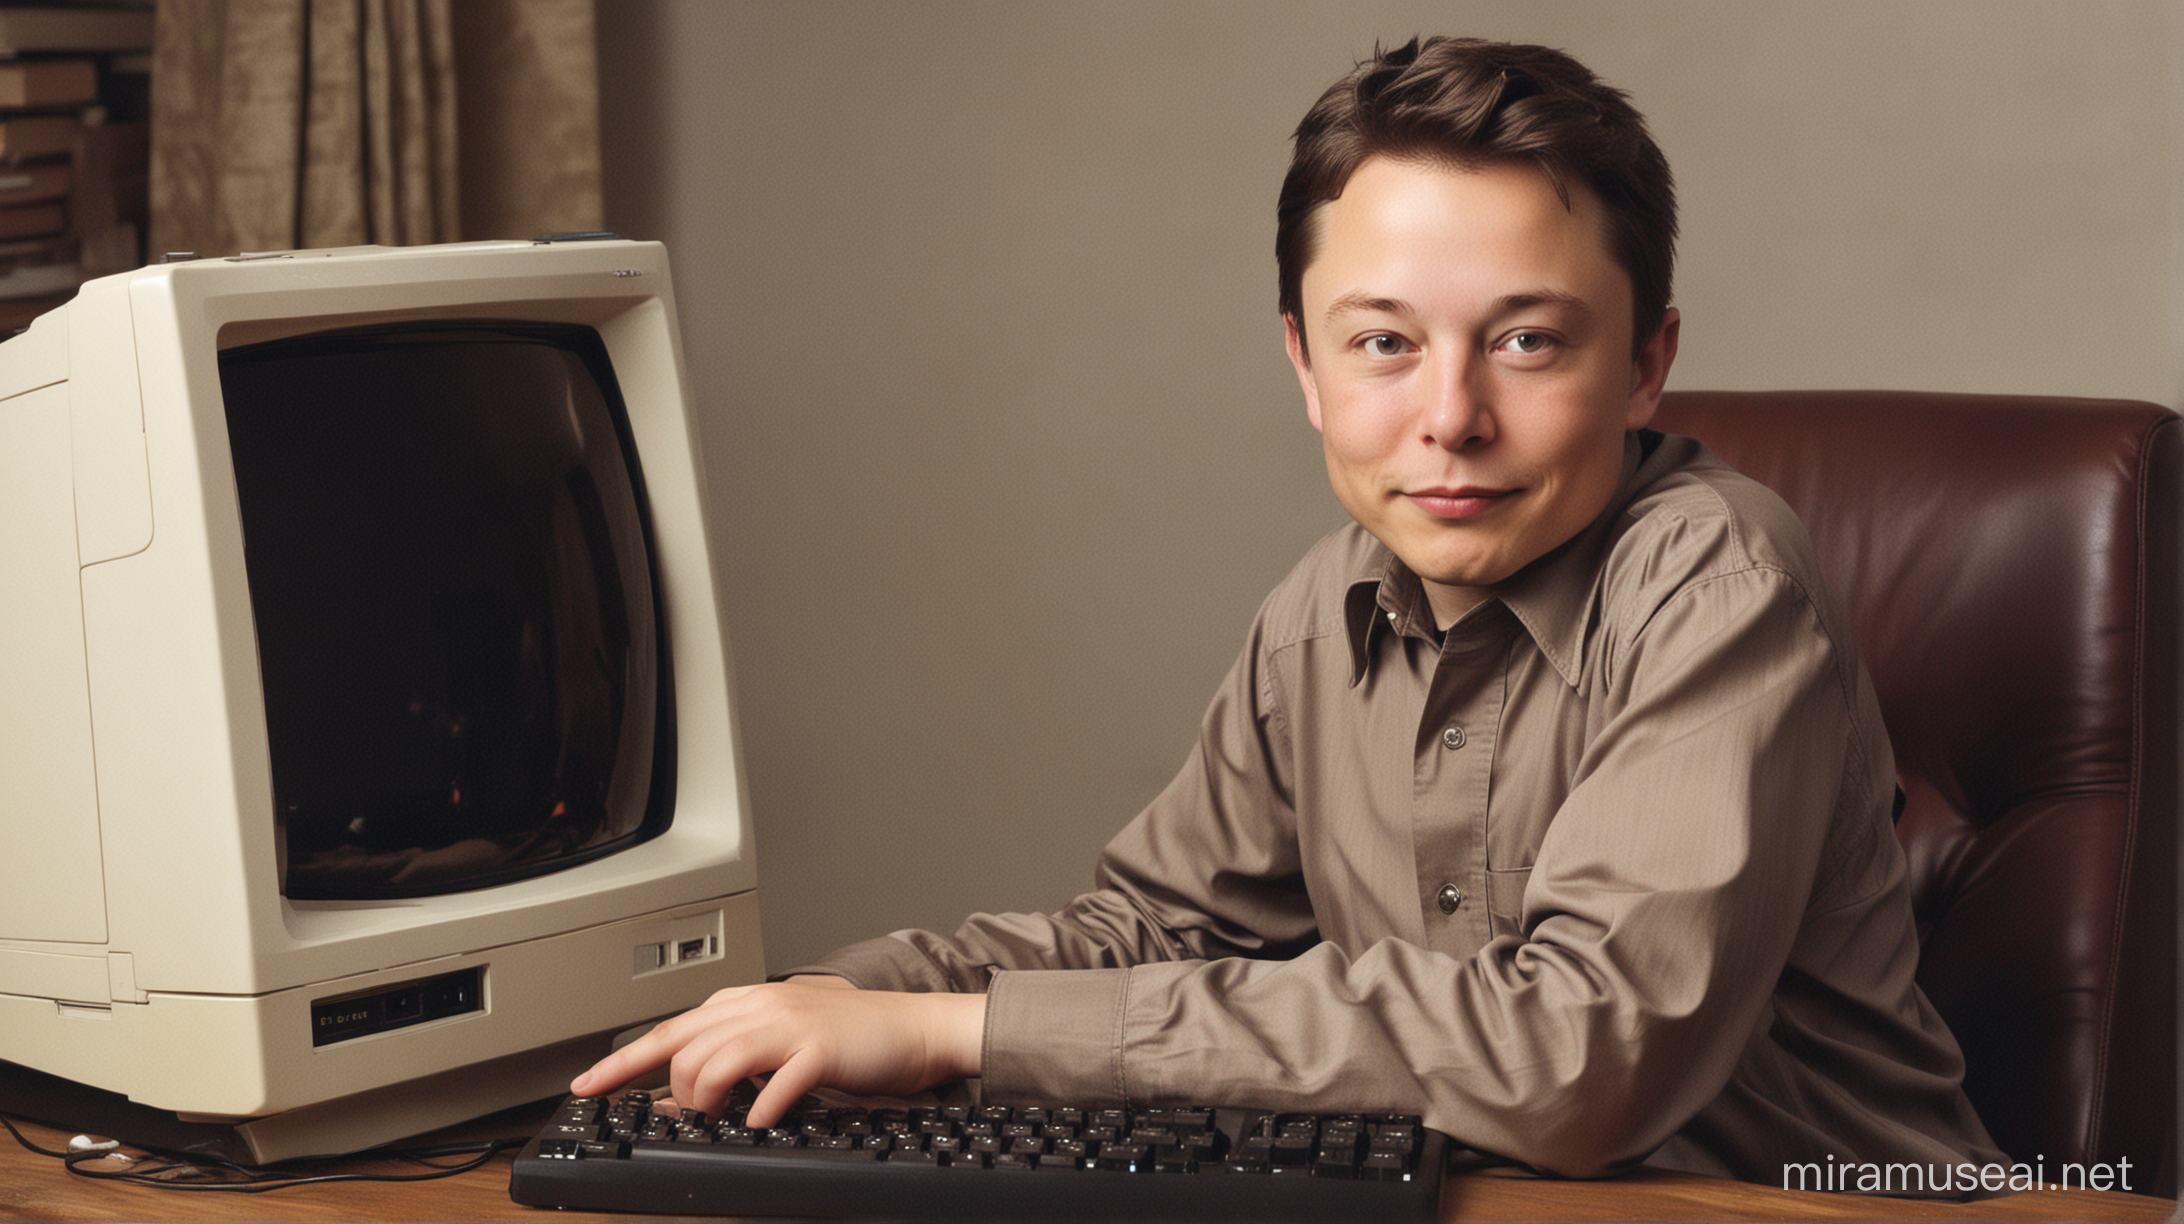 Young Elon Musk Engaged in Programming on Vintage PC